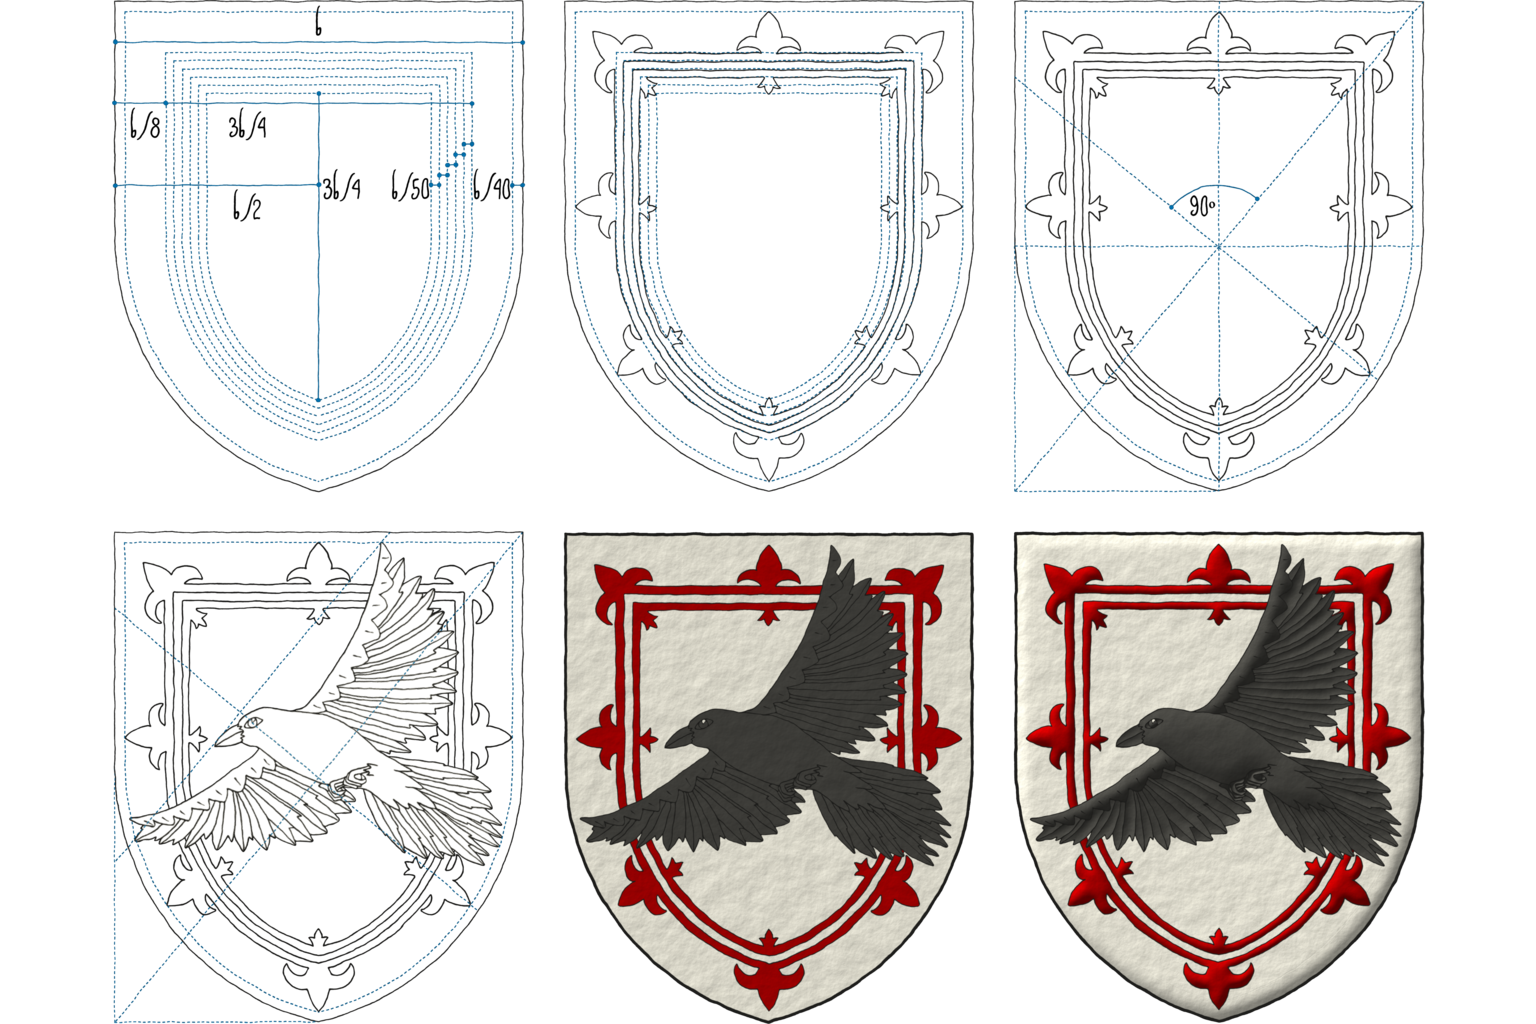 These are the arms of Alton Thompson of the family Josserand de Bourgogne emblazoned by me in 6 steps: 1, 2) structure and delineation of the double tressure, 3, 4) structure and delineation of the Corvus corax trian volant, 5) plain tincture, and 6) lights and shadows. Blazon: Argent, a double tressure flory Sanguine, overall a Corvus corax trian volant proper.